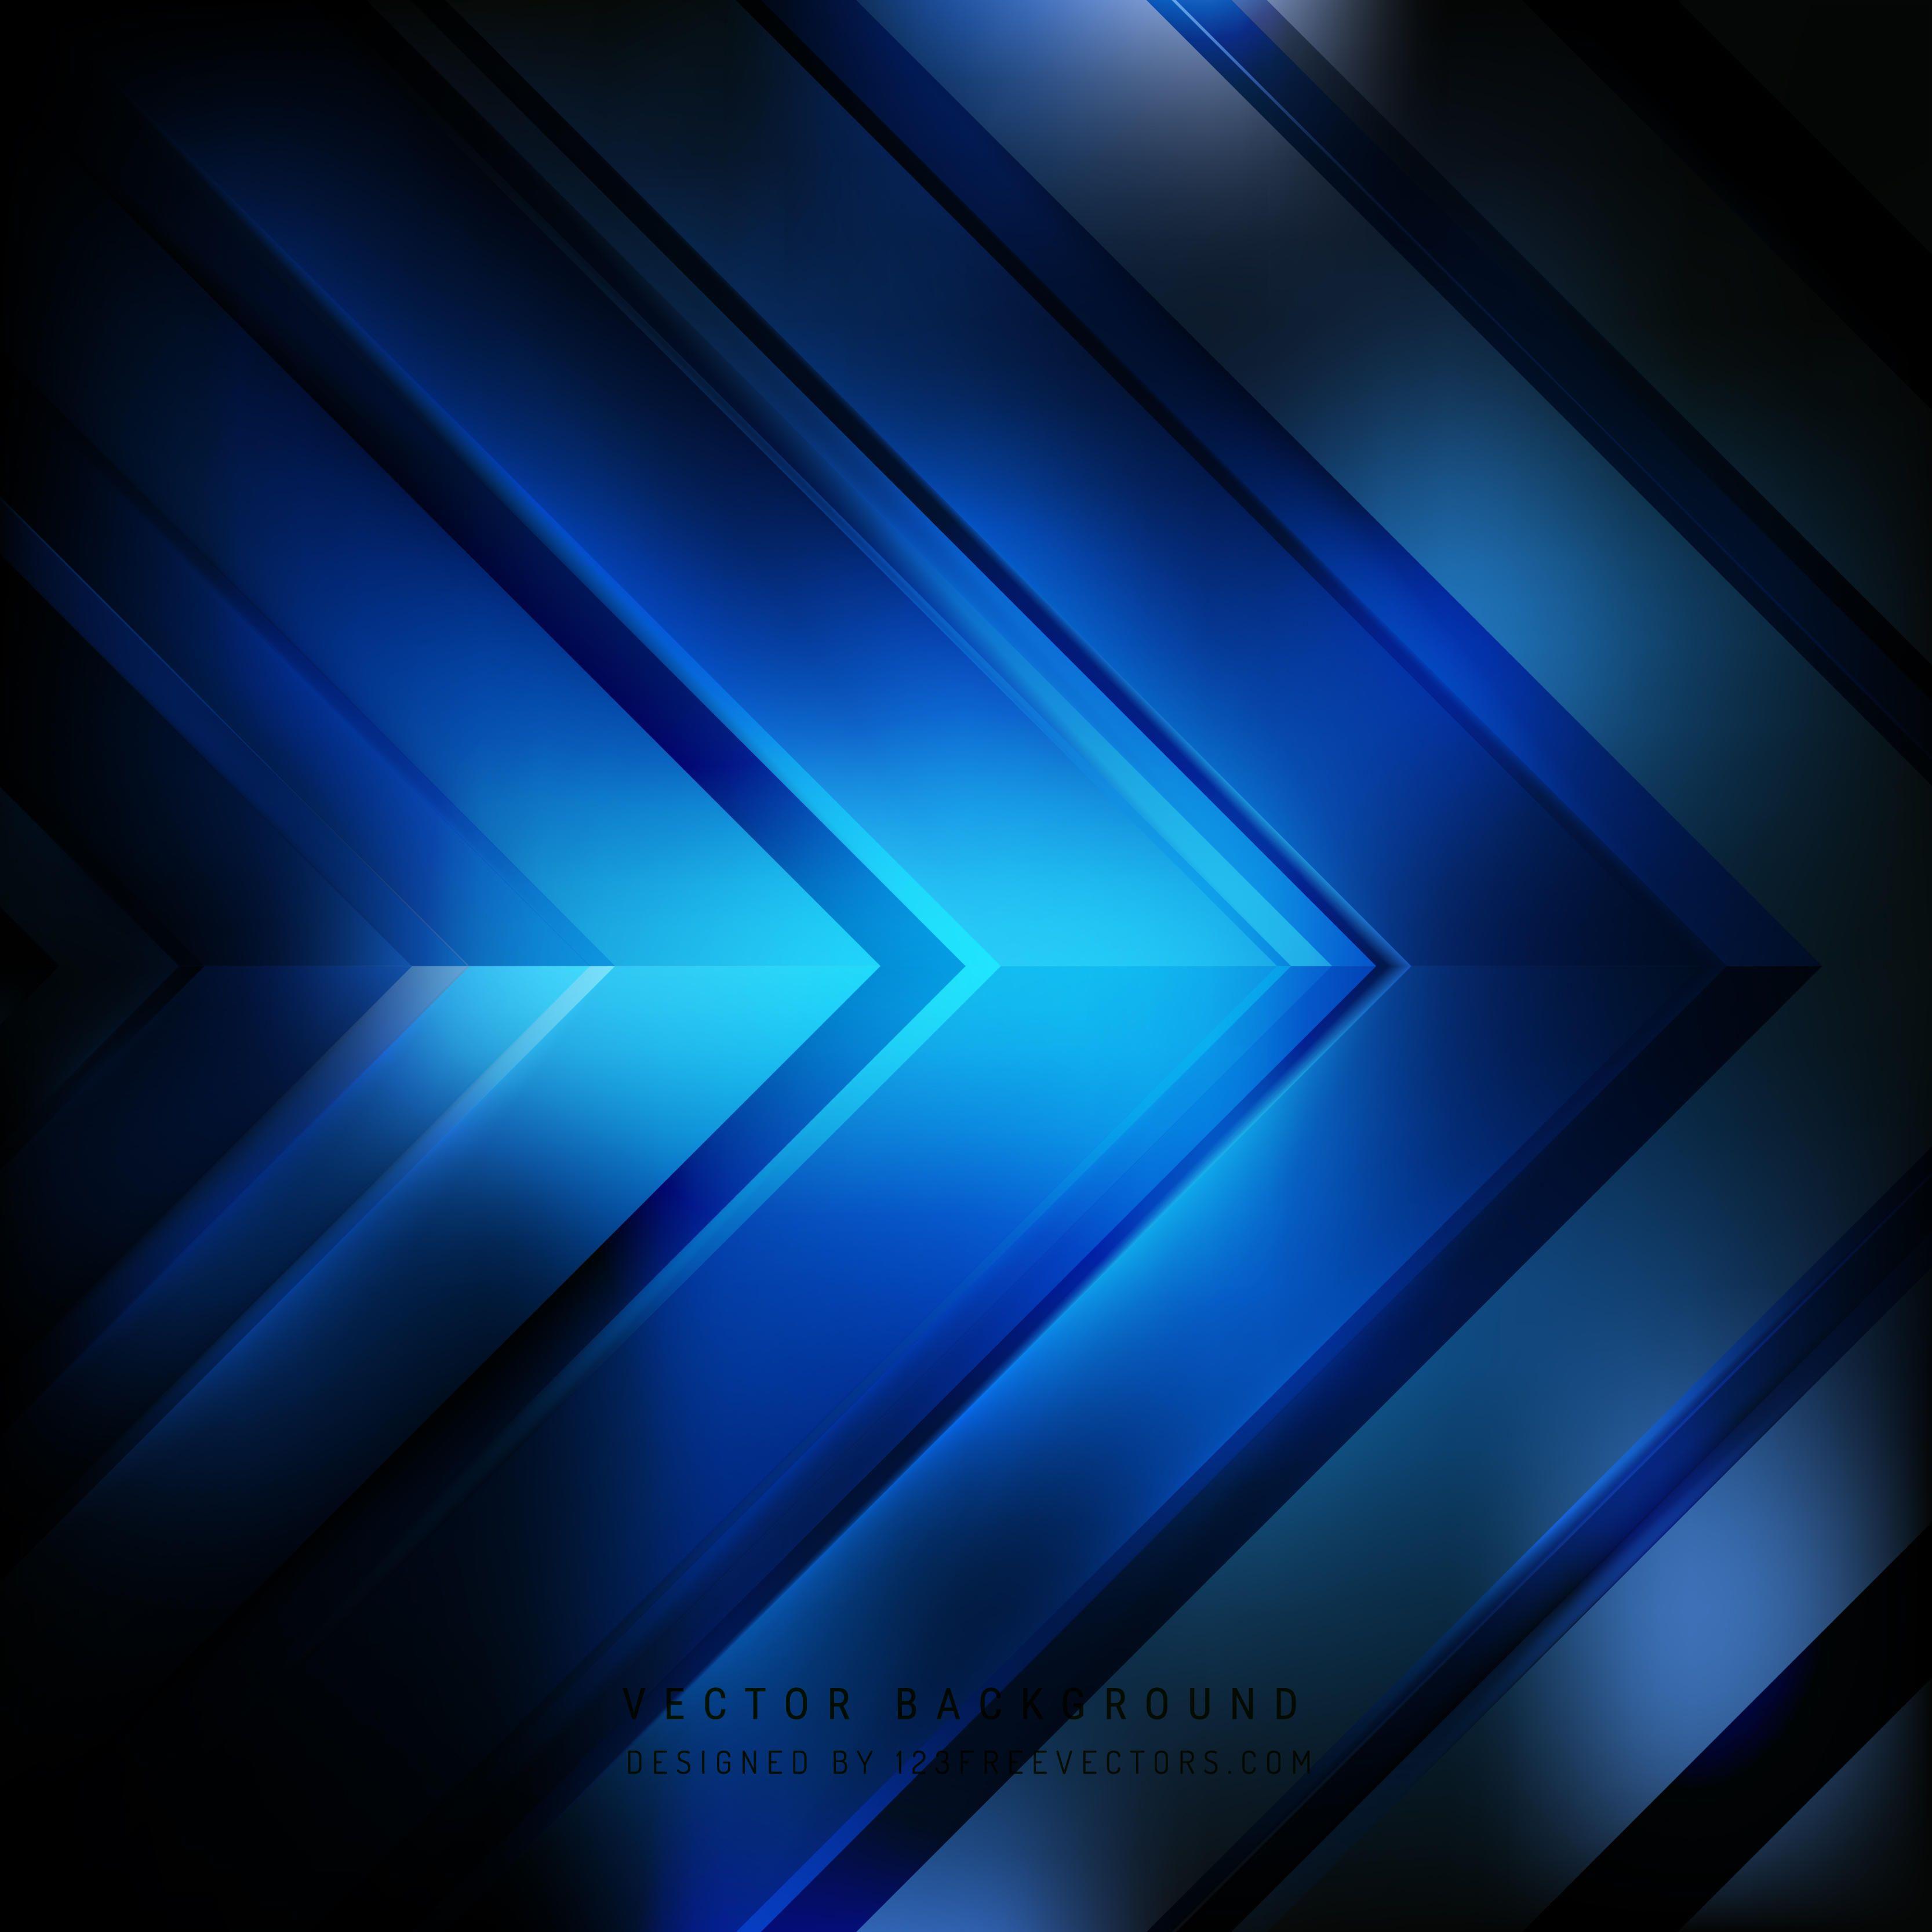 Abstract Blue Black Arrow Background Freevectors